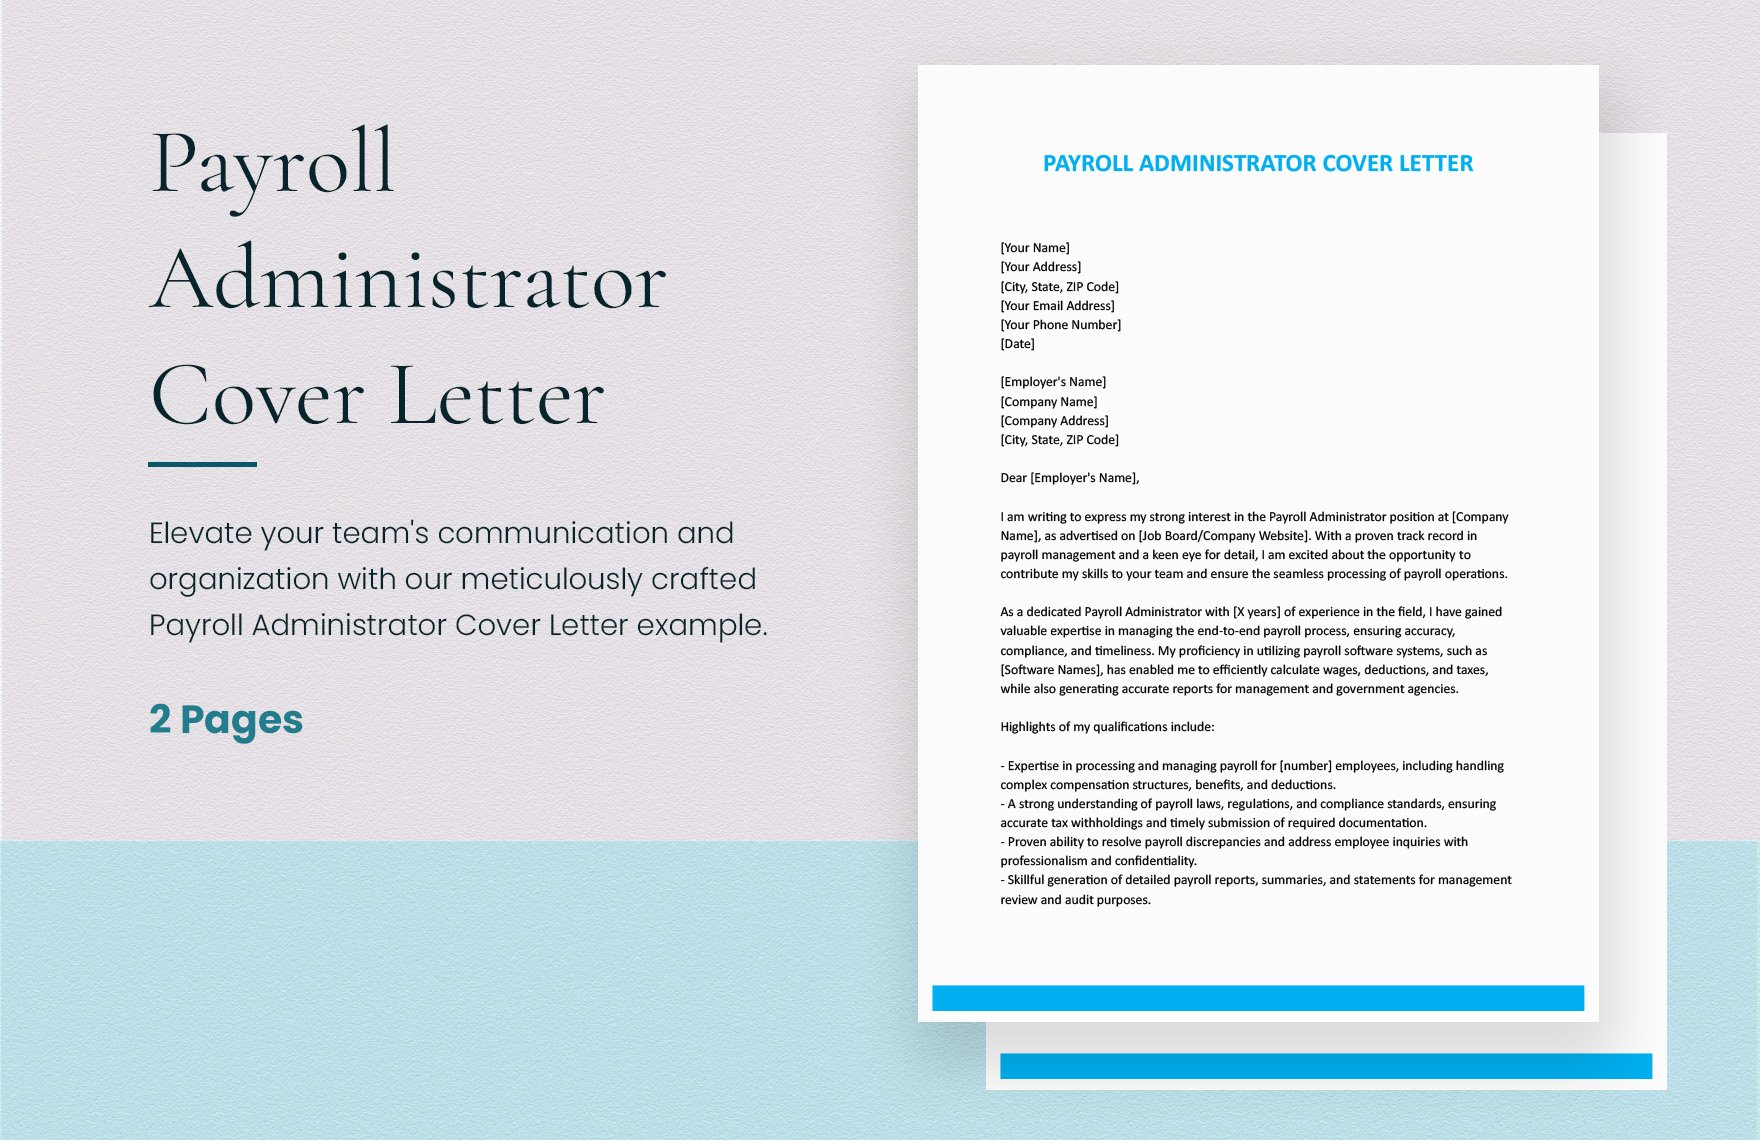 Payroll Administrator Cover Letter in Word, Google Docs, Apple Pages